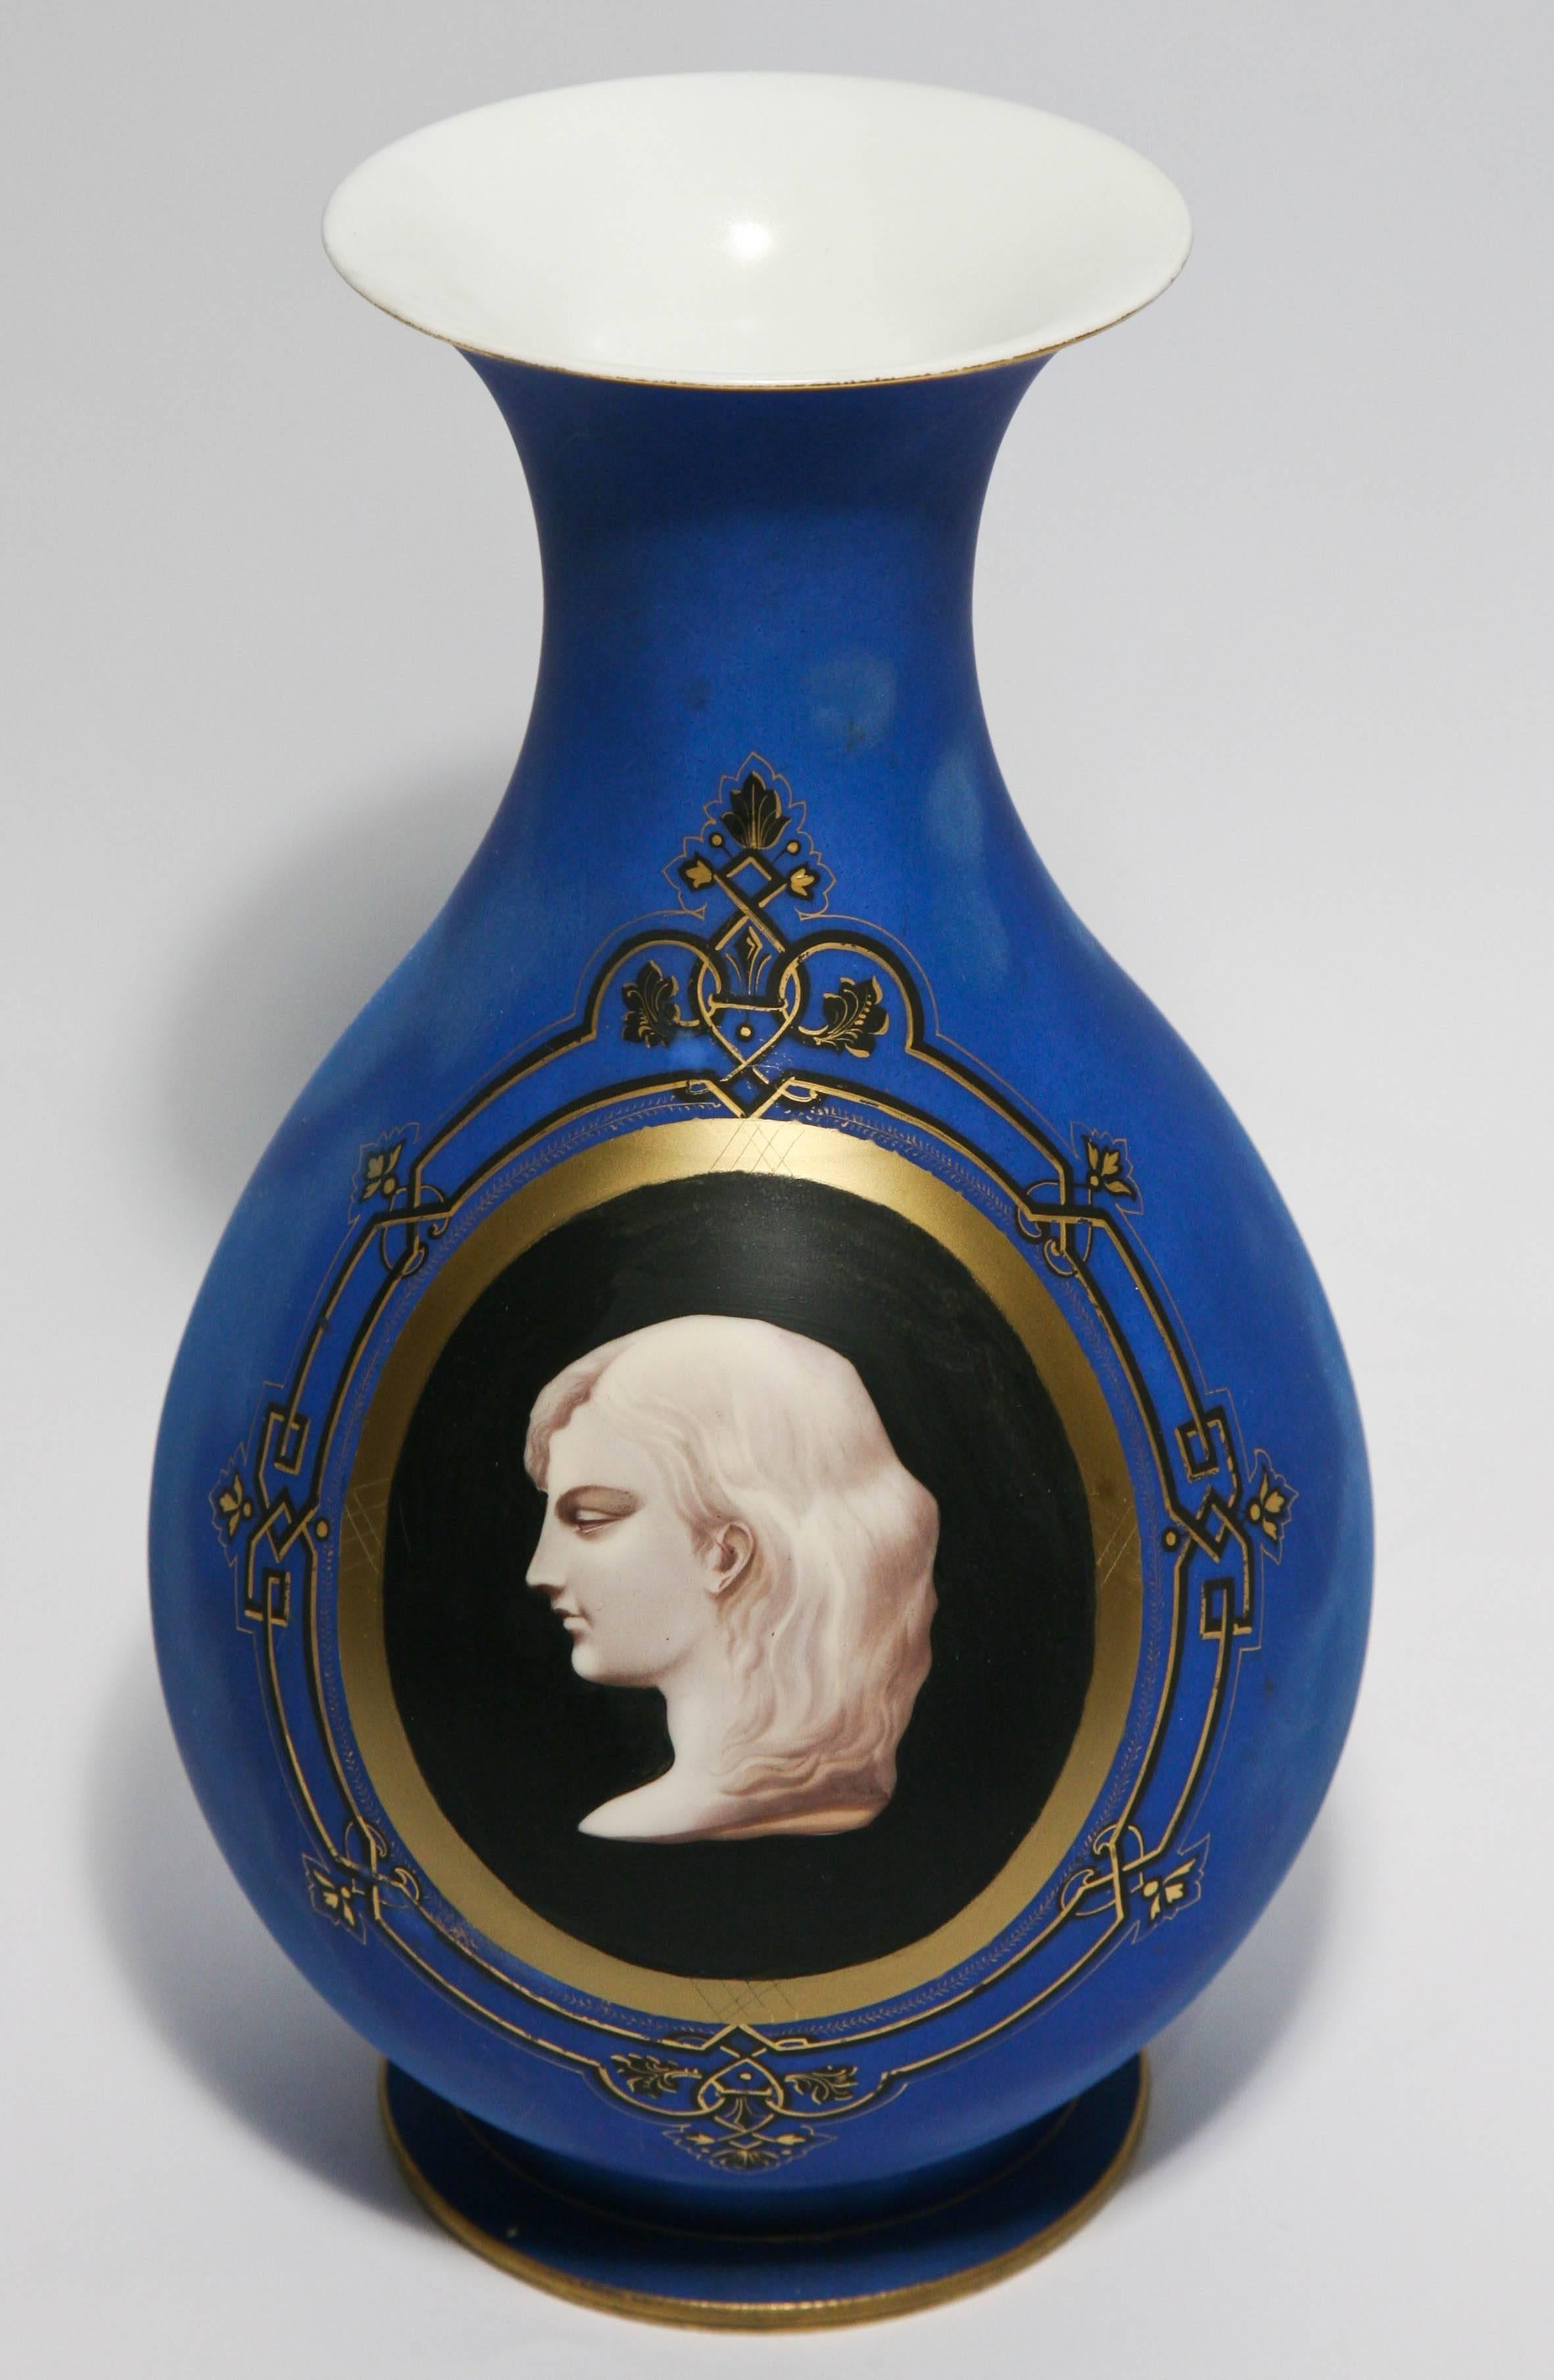 A unique and well done portrait vase on an allover royal blue ground with gilt accents. An interesting black ground where the neoclassical portrait is painted on. We attribute the maker to one of the English Bristol glass factories and circa 1850.